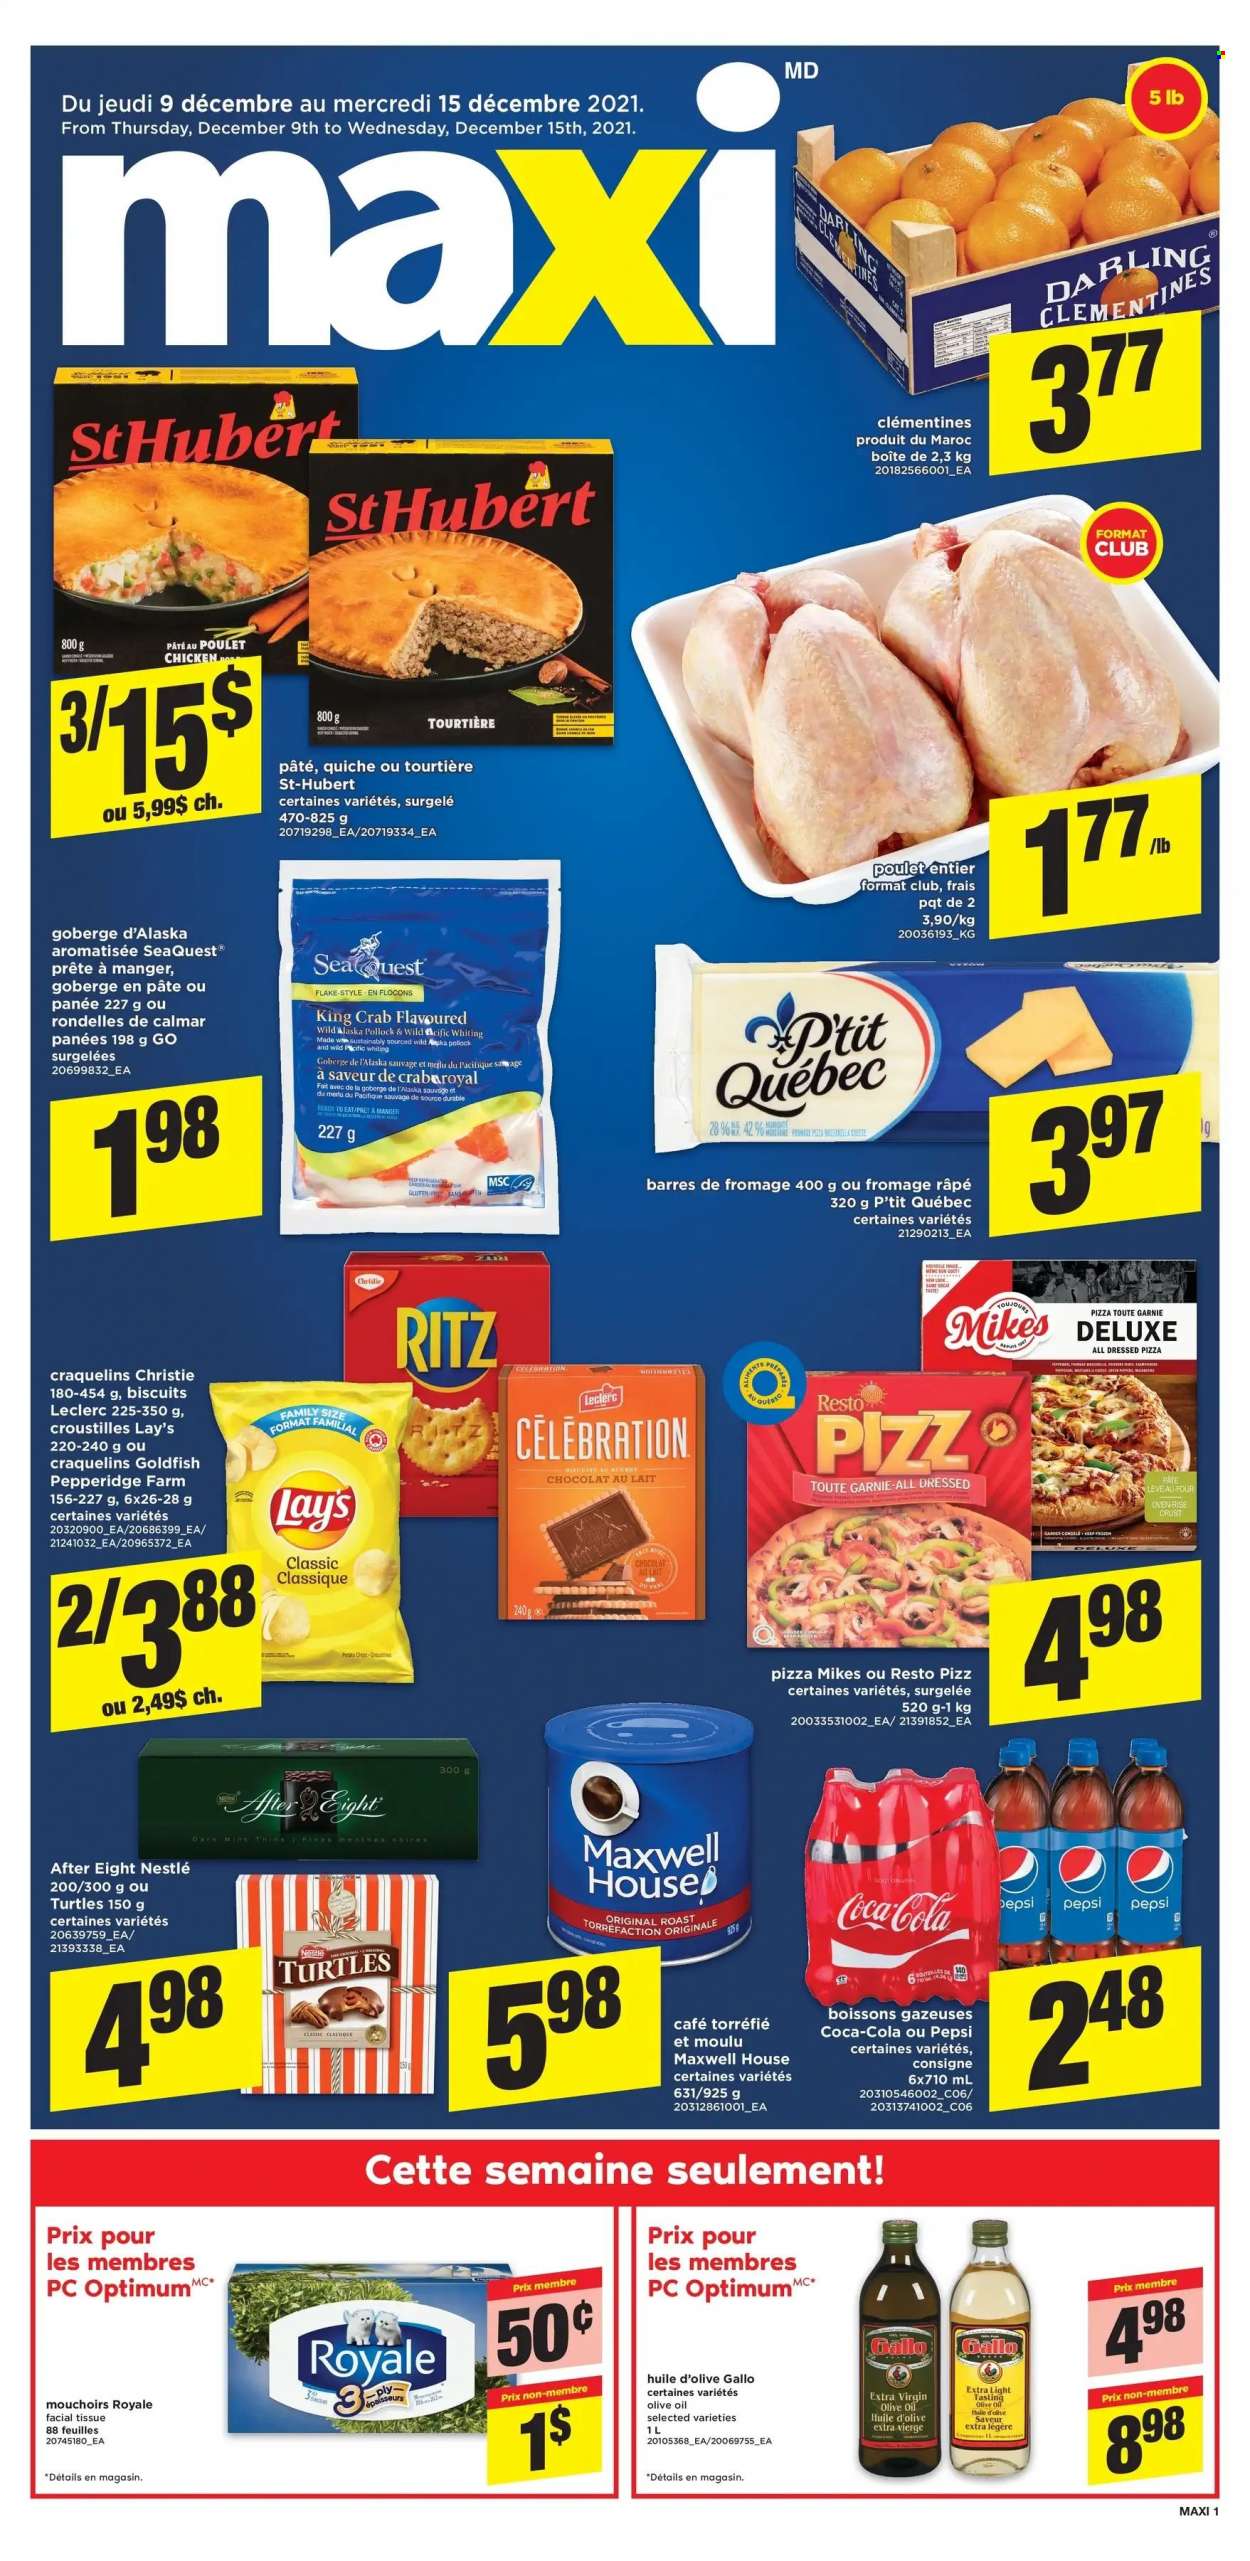 thumbnail - Maxi Flyer - December 09, 2021 - December 15, 2021 - Sales products - clementines, king crab, pollock, crab, whiting, quiche, Celebration, biscuit, After Eight, RITZ, Lay’s, Thins, Goldfish, extra virgin olive oil, olive oil, oil, Coca-Cola, Pepsi, Maxwell House, tissues, Nestlé. Page 1.